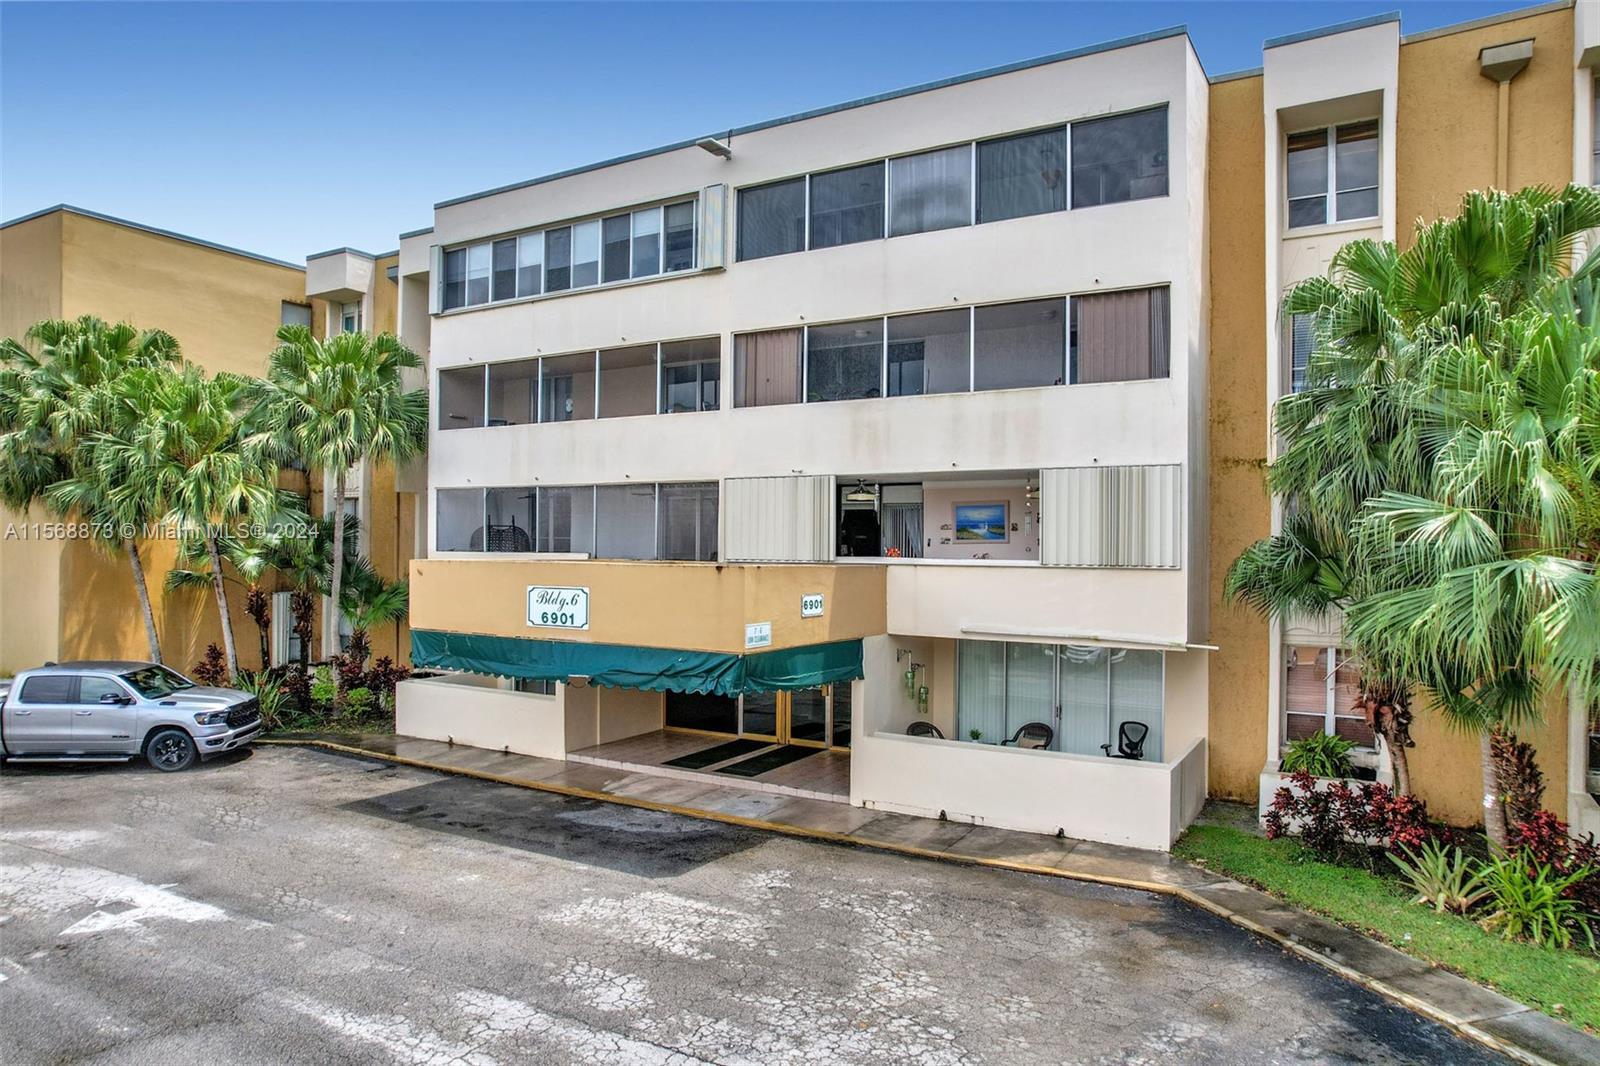 Welcome to this charming and wonderfully spacious condo nestled in Kendall Lakes. Step inside this r